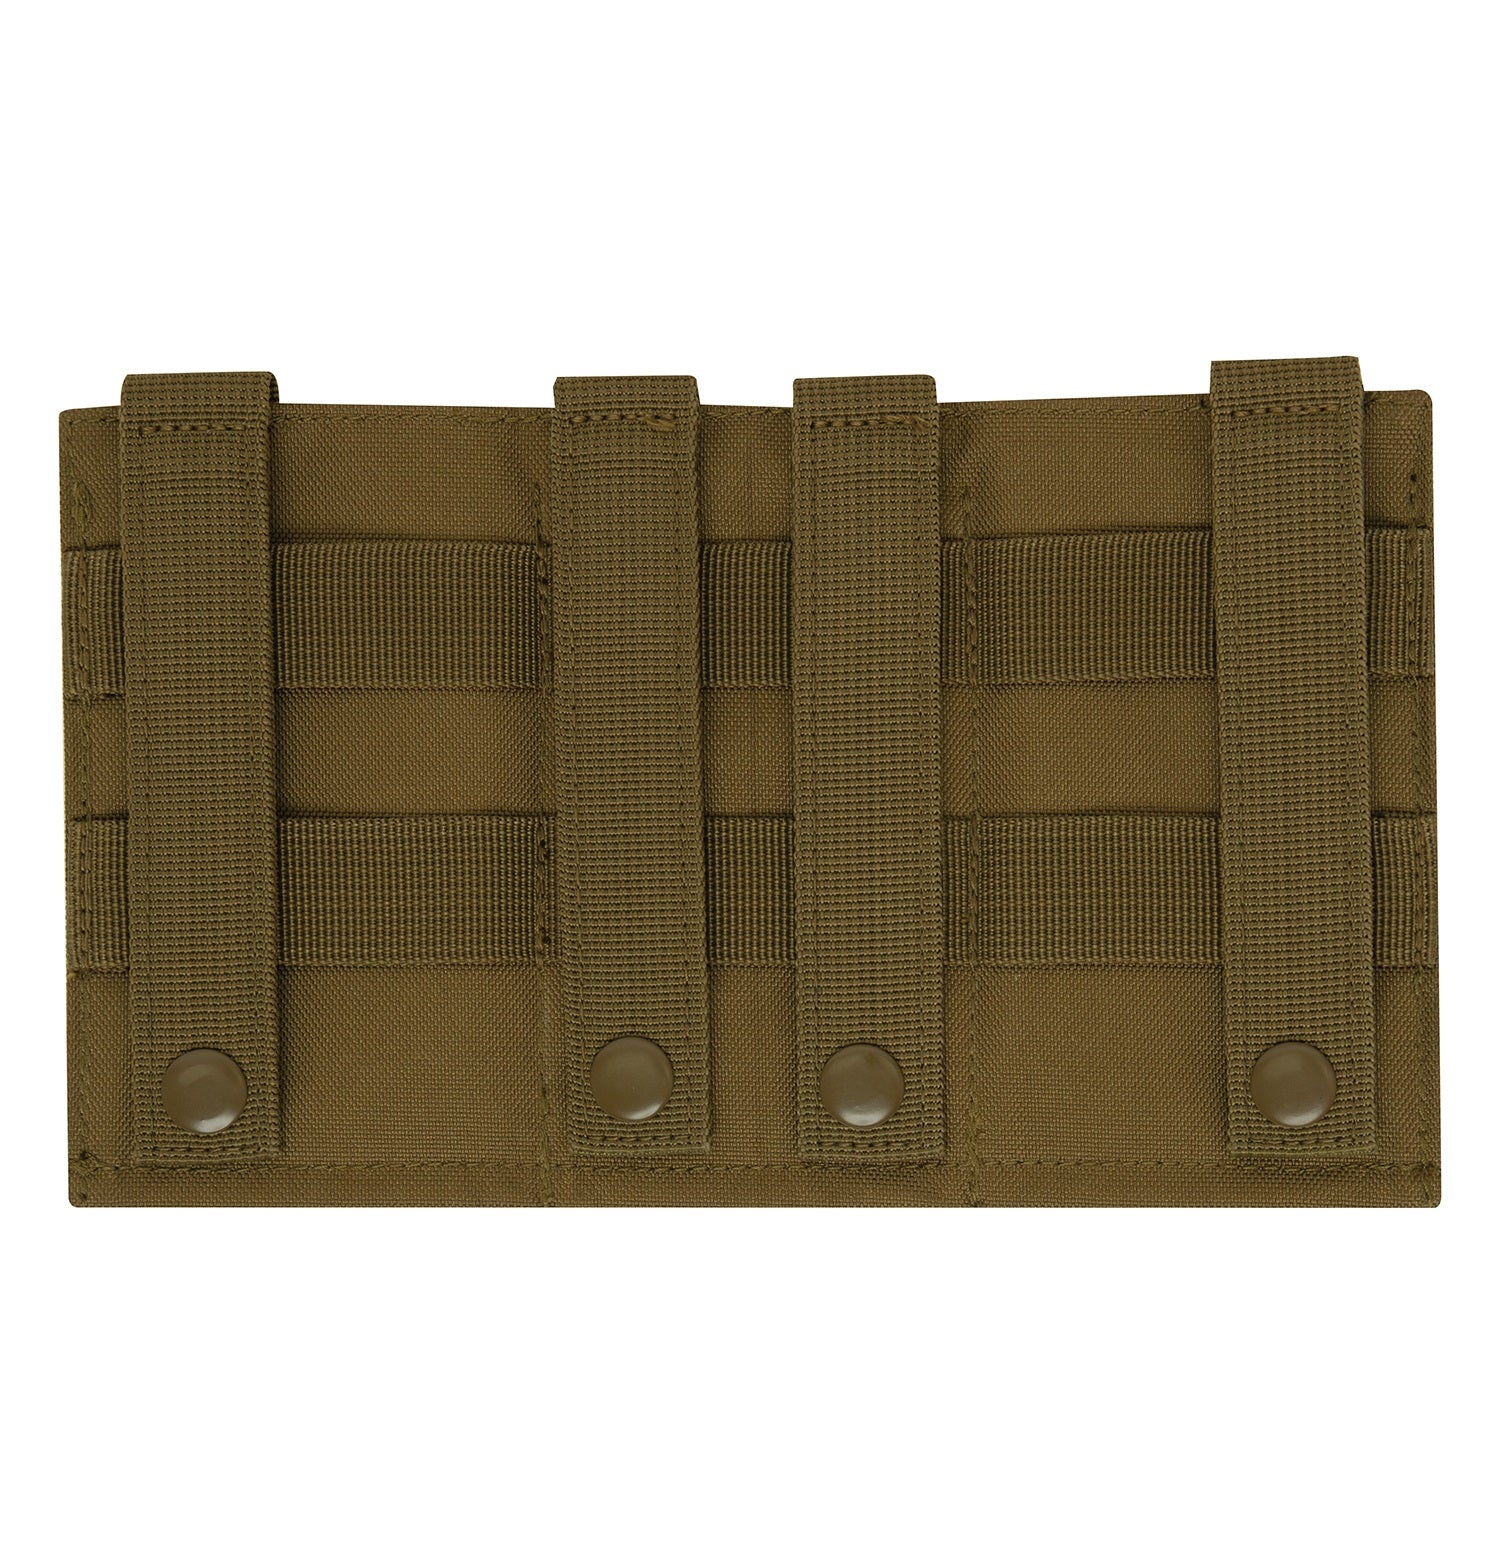 Rothco Lightweight 3Mag Elastic Retention Pouch Coyote Brown